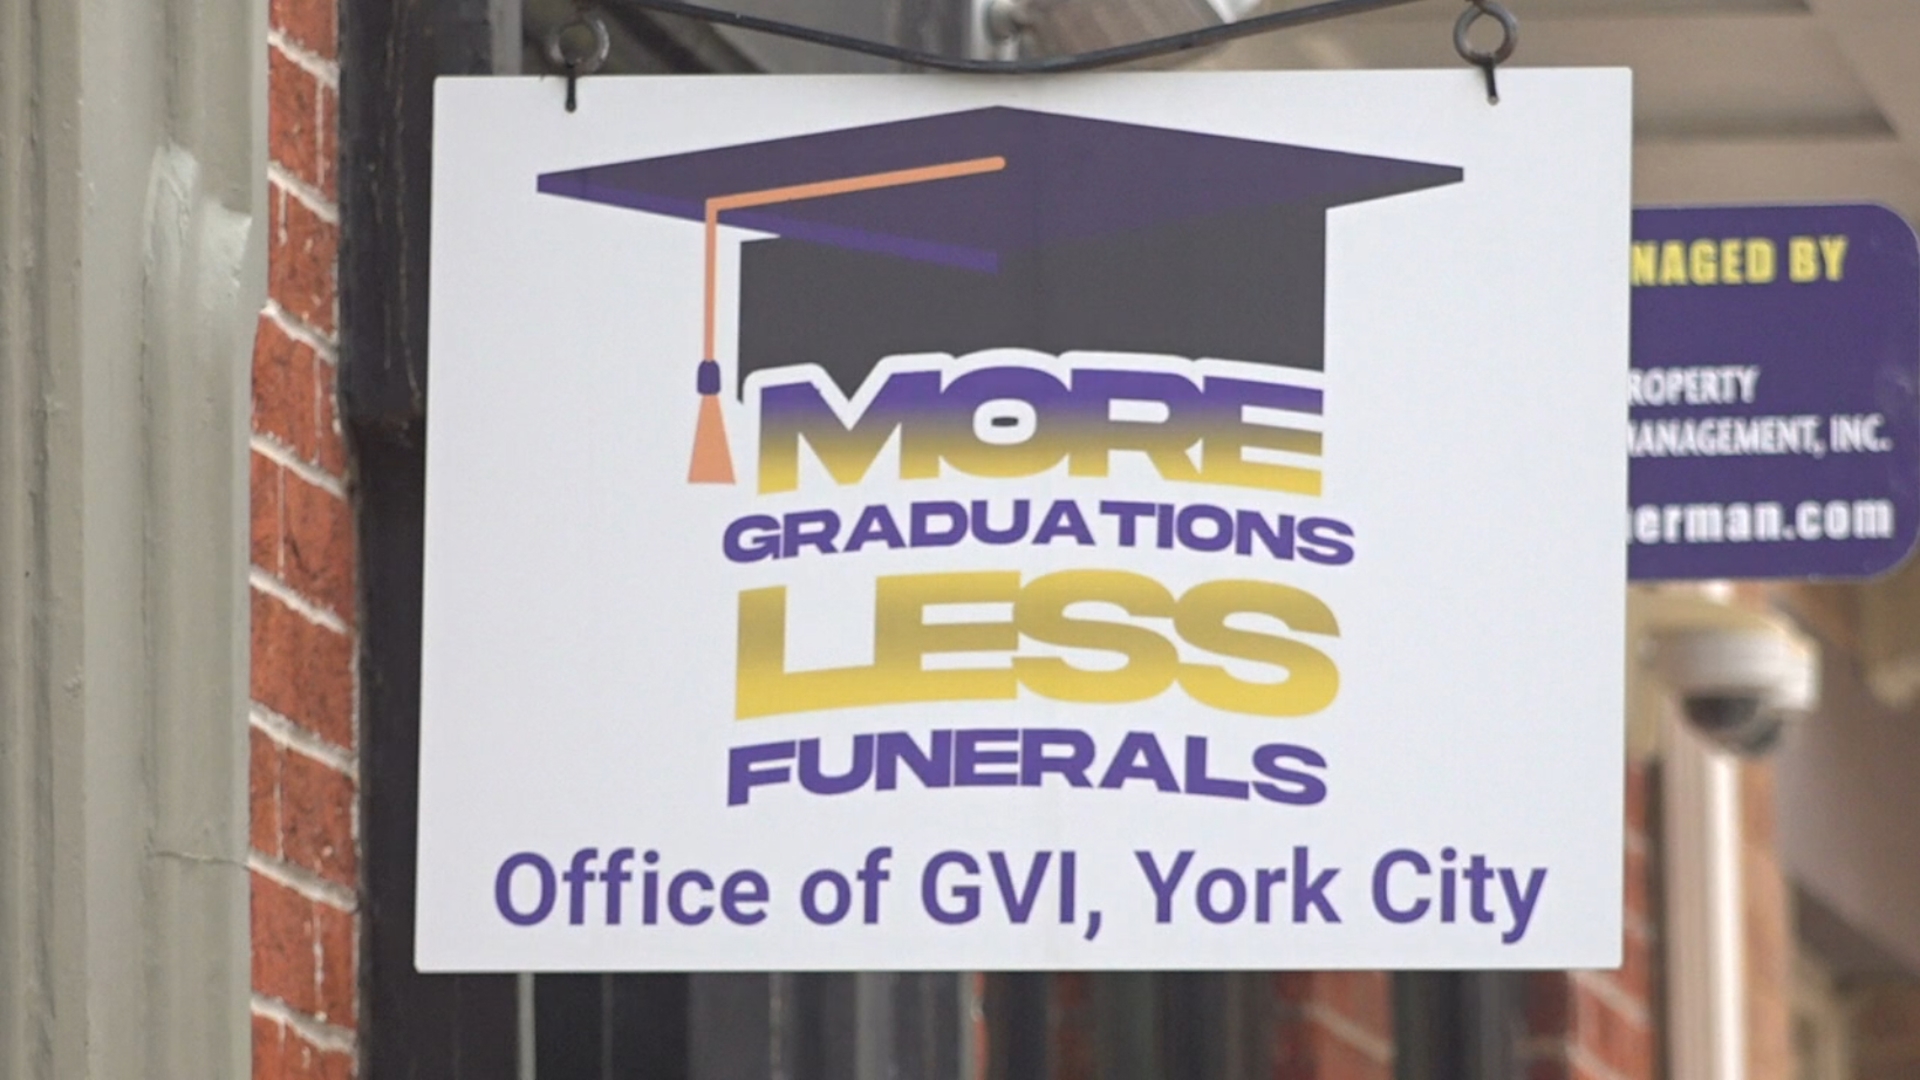 FOX43 was given access to the group violence intervention program in York, which helped reduce the city's homicide rate by 75% last year.